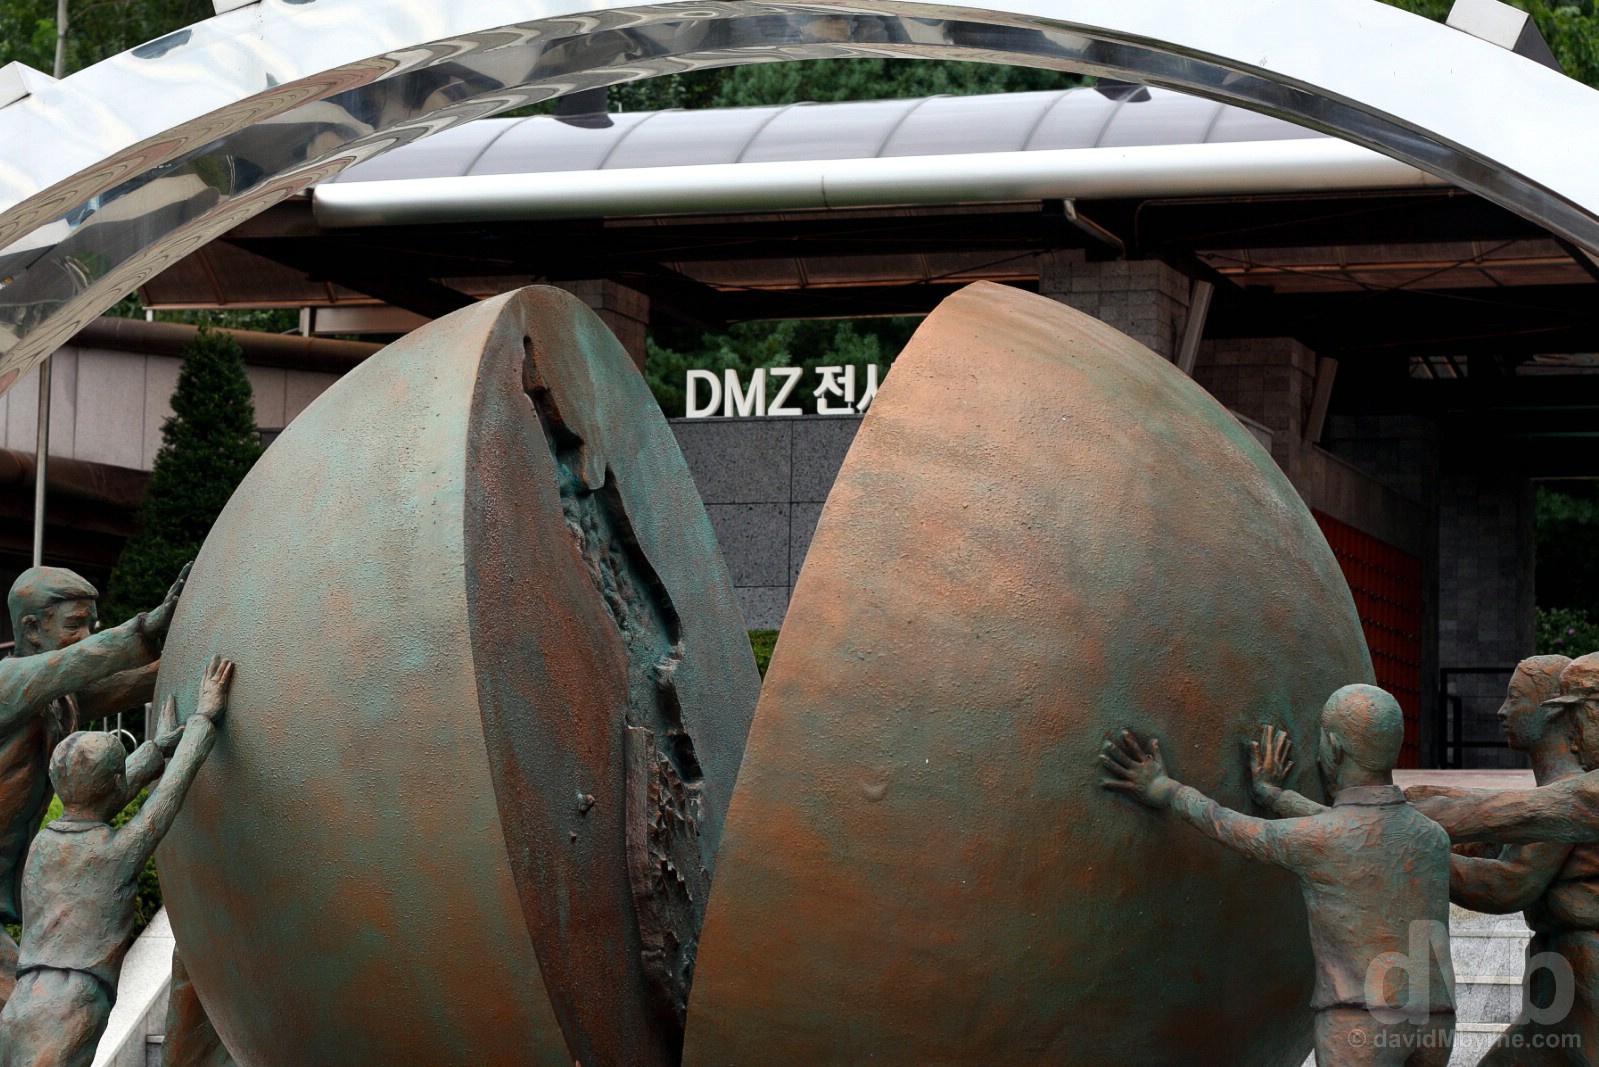 The 'This One Earth' statue at the 3rd Tunnel of the Demilitarized Zone (DMZ), South Korea. August 21, 2008. 